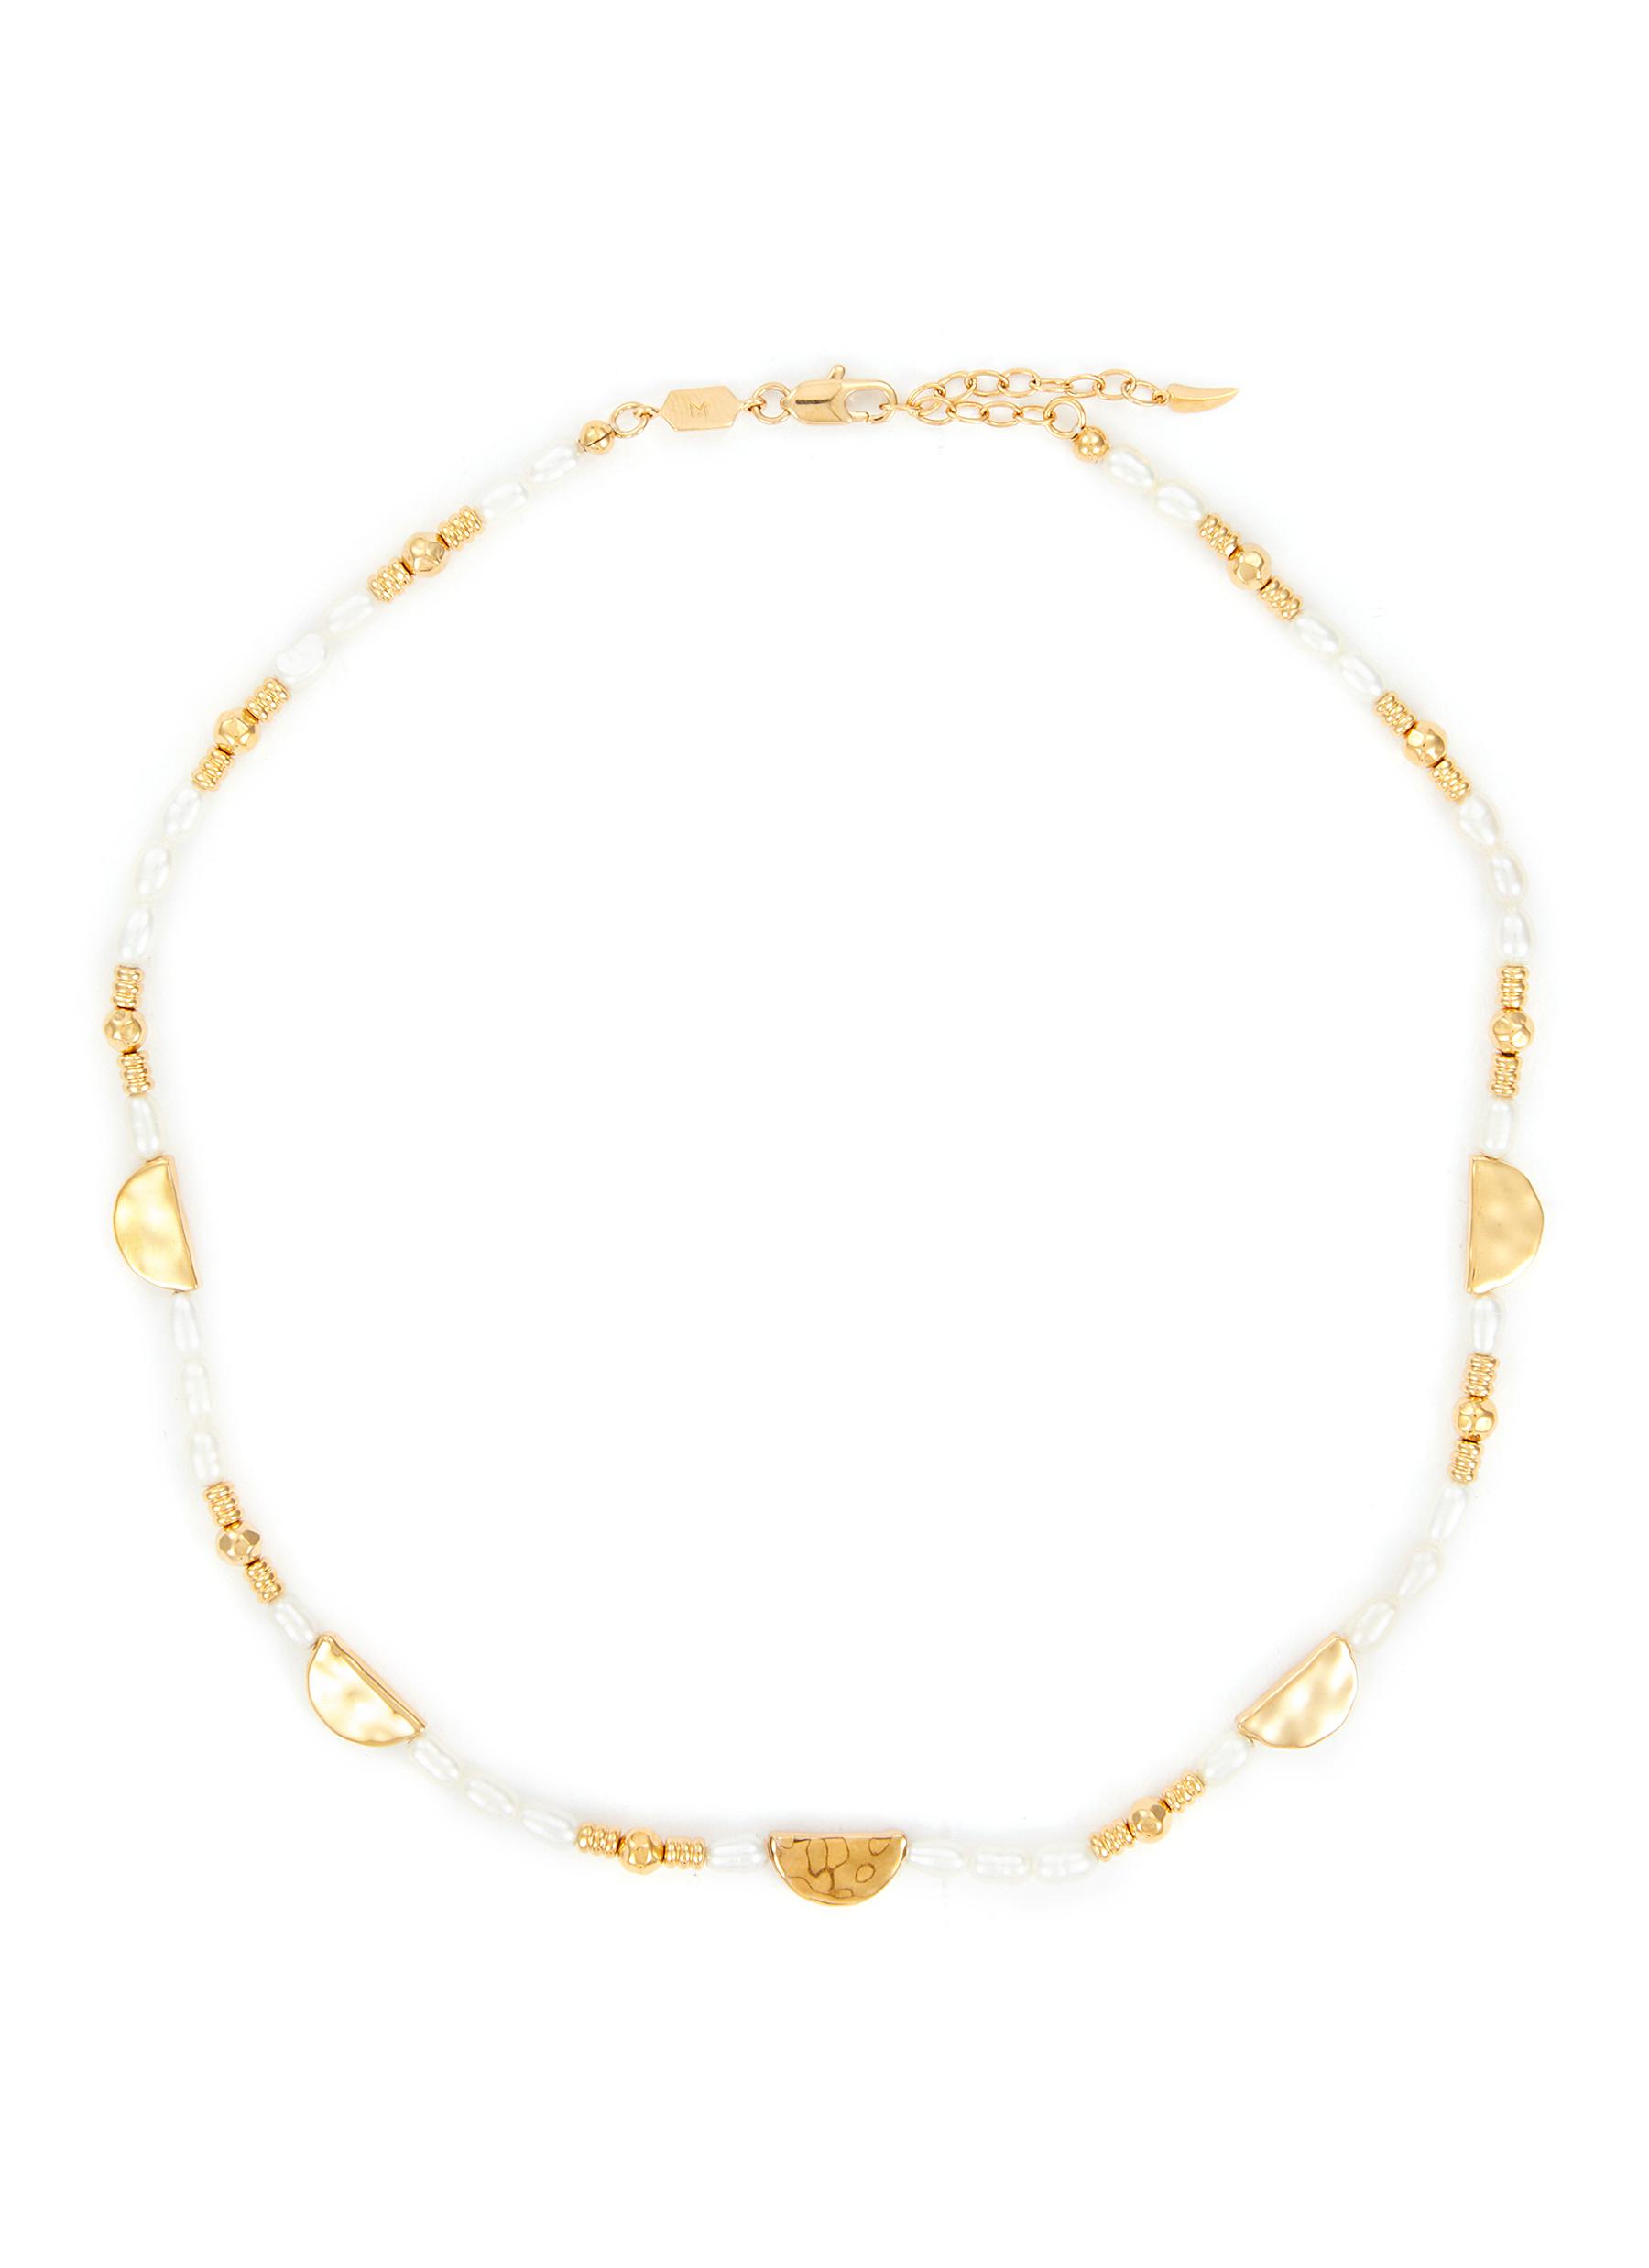 Zenyu 18K Gold Plated Freshwater Pearl Half Moon Charm Necklace